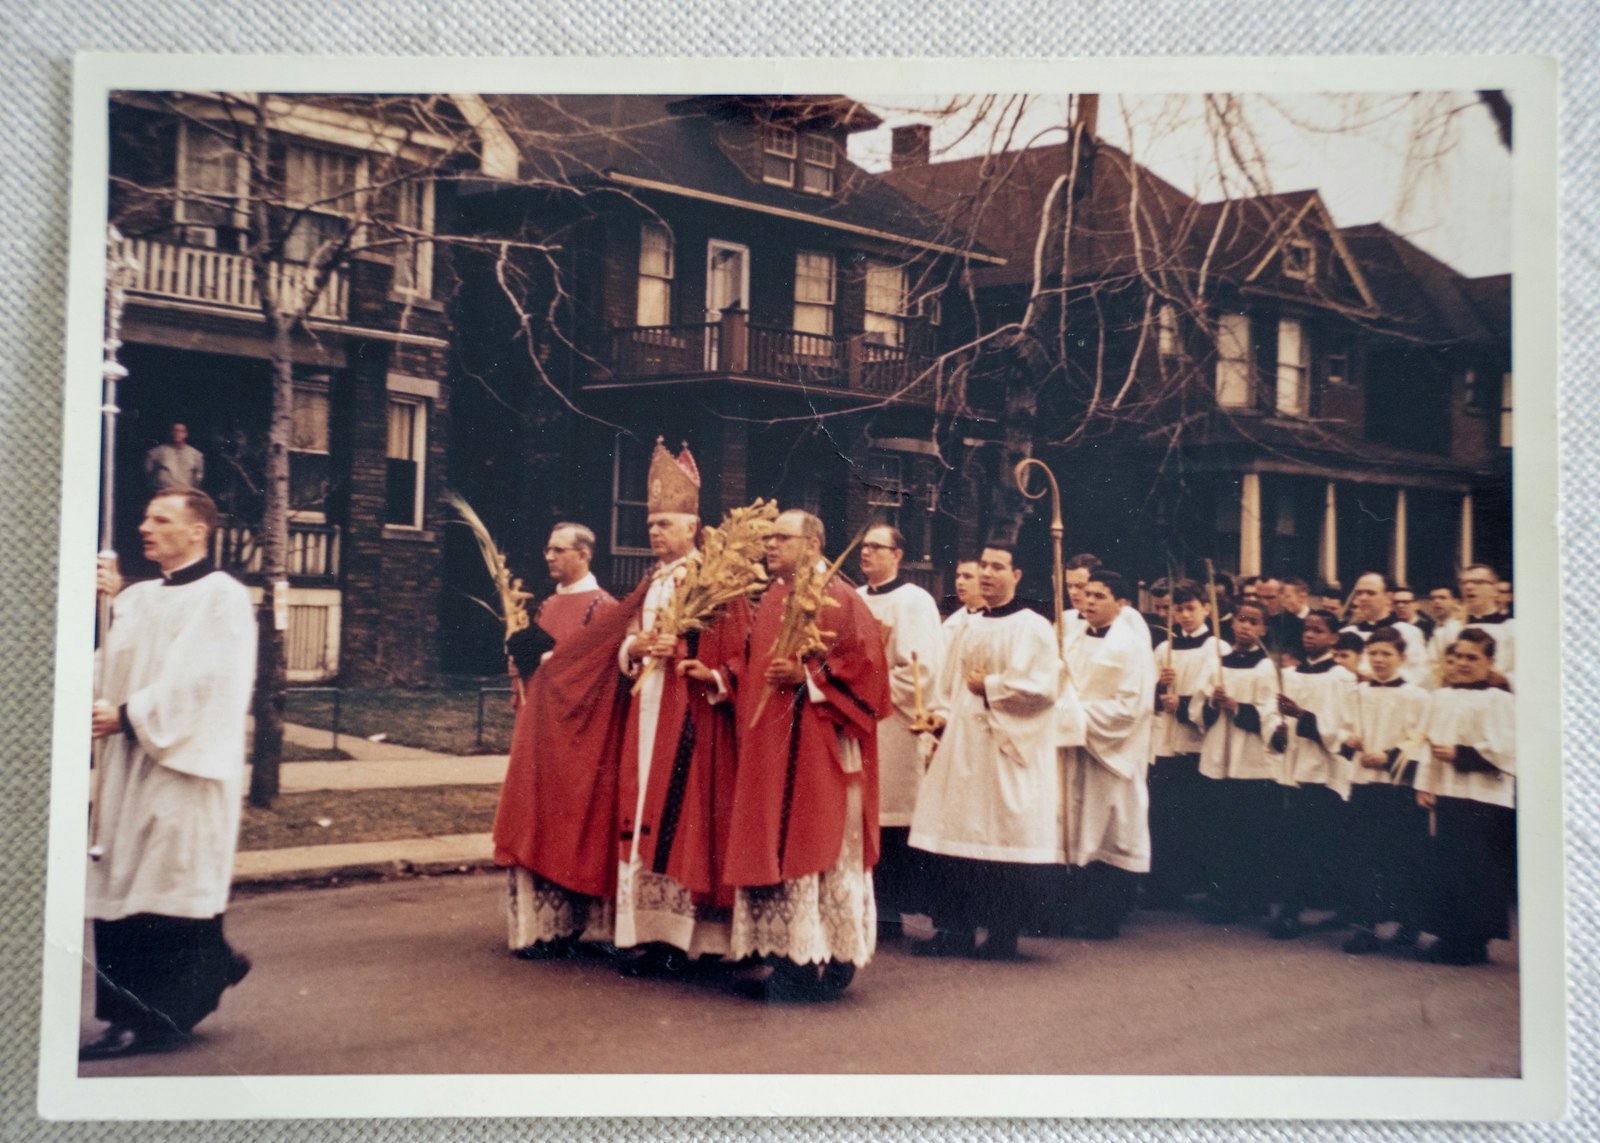 Cardinal John F. Dearden carries a palm frond designed by the Wenson family through the streets of Detroit during a Palm Sunday liturgy in this file photo.